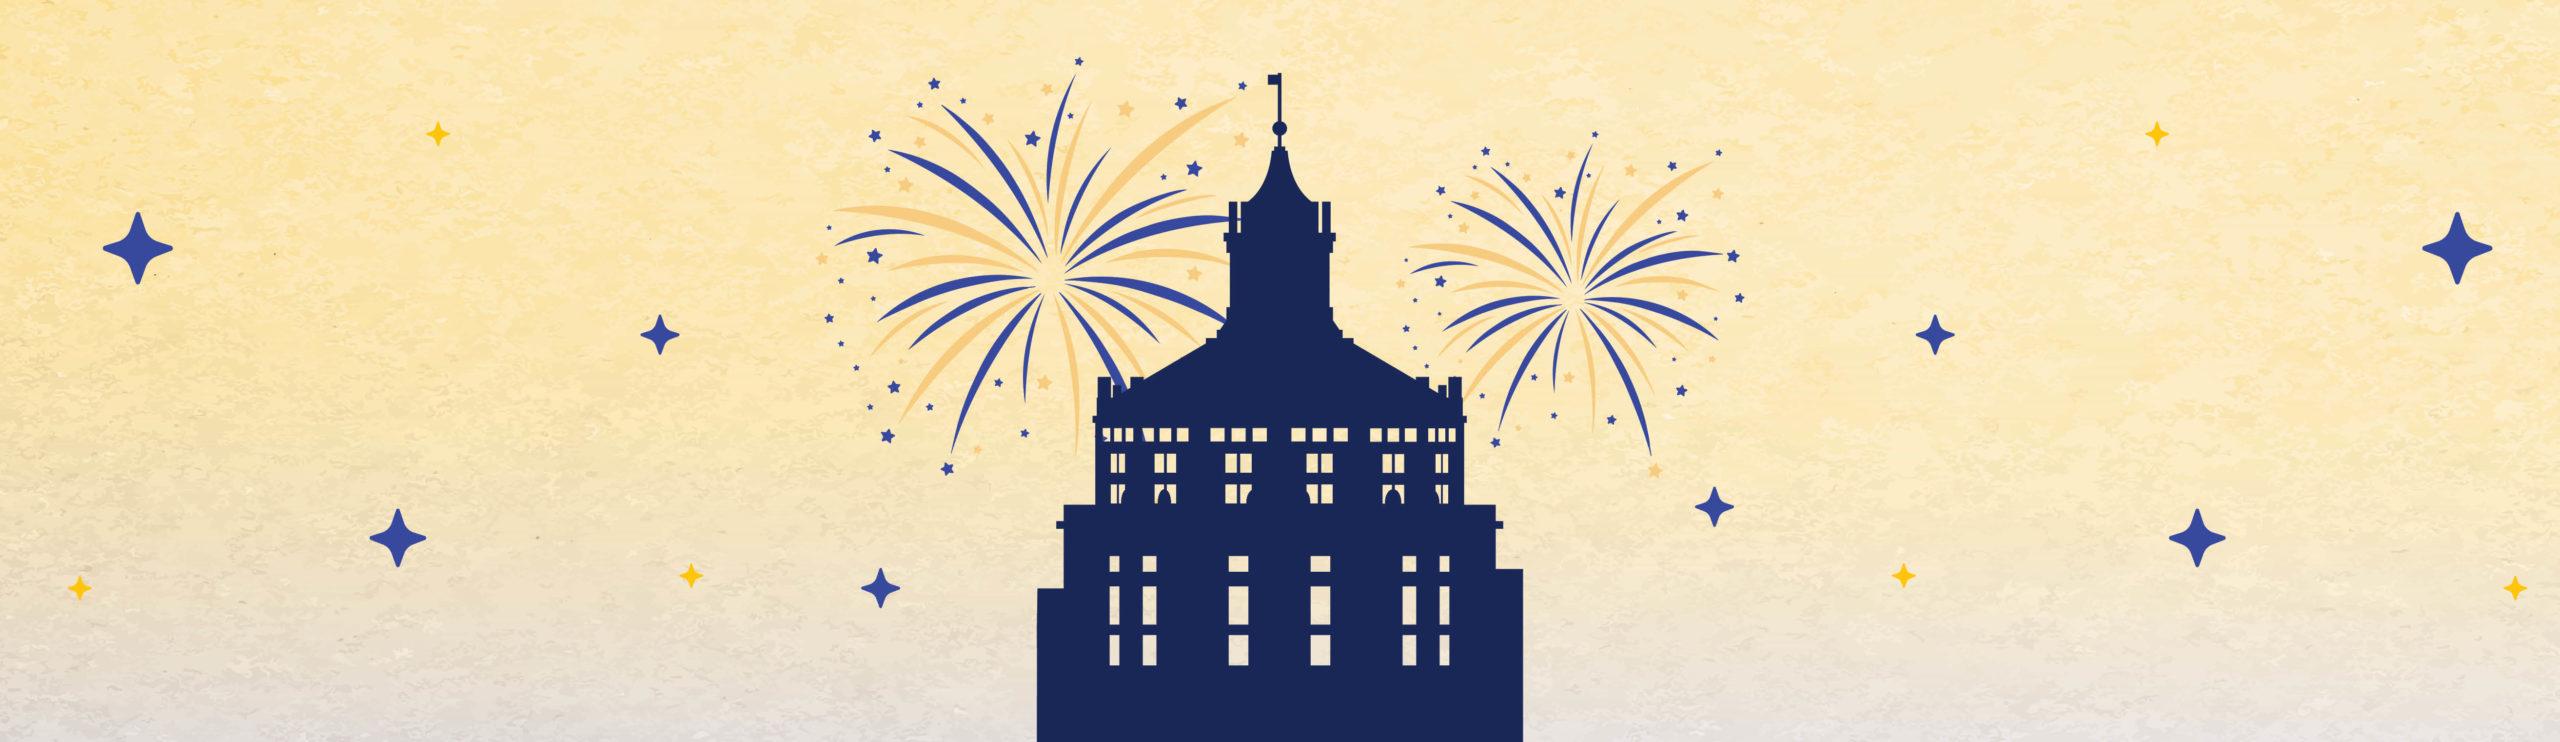 illustrated image of rush rhees library tower and fireworks